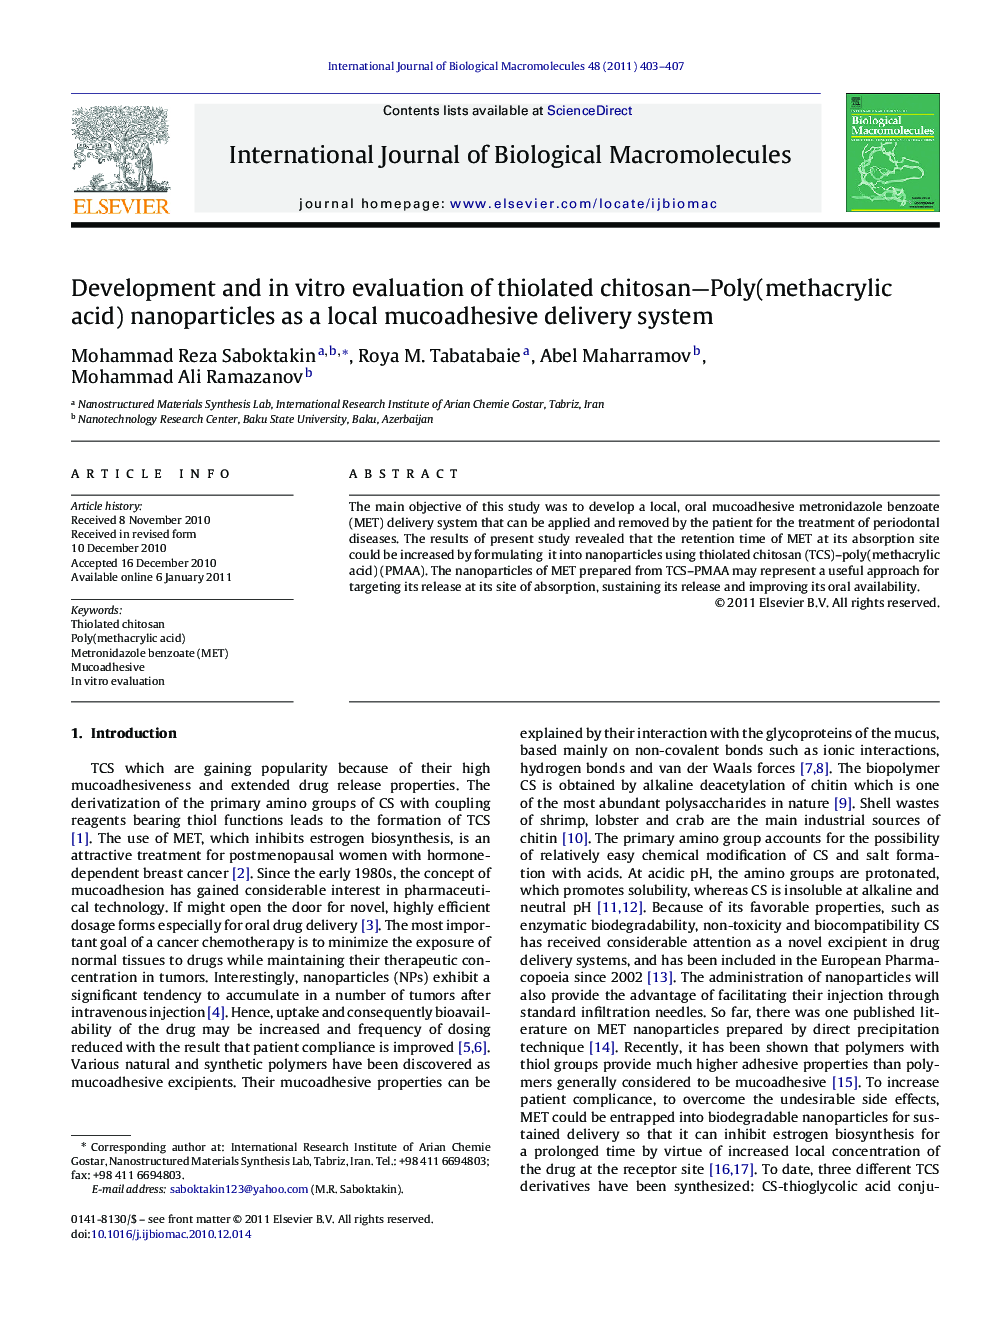 Development and in vitro evaluation of thiolated chitosan-Poly(methacrylic acid) nanoparticles as a local mucoadhesive delivery system